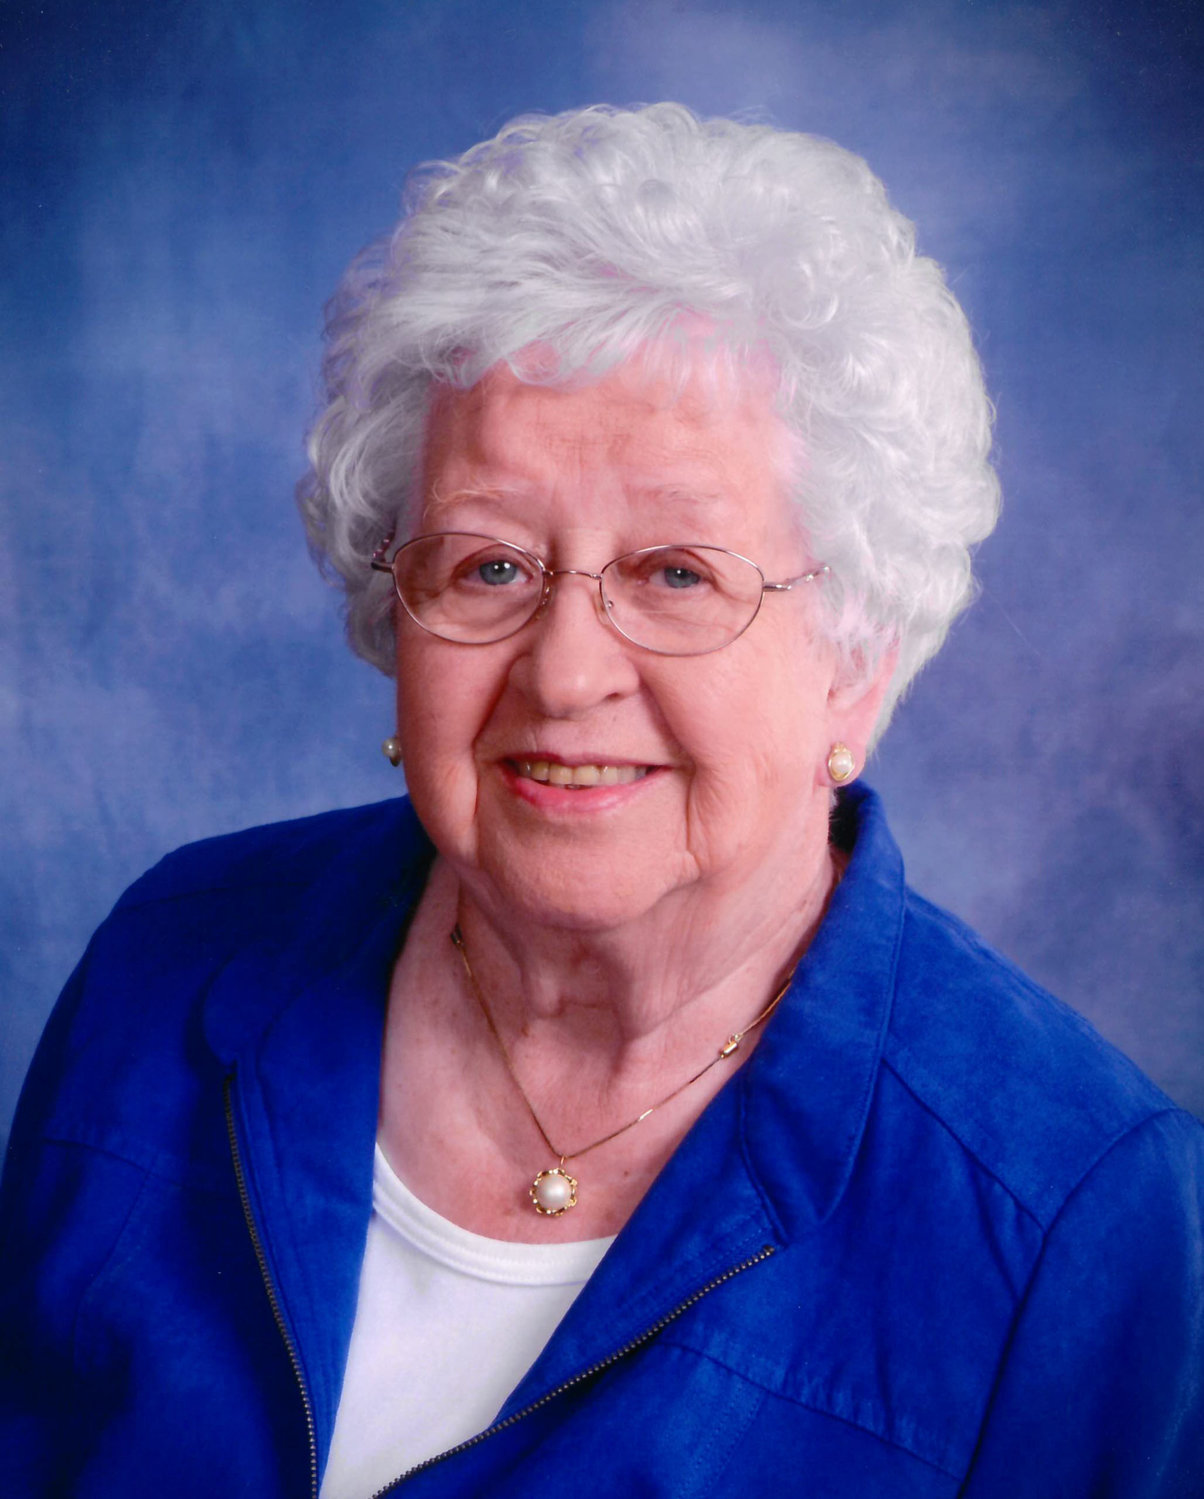 Bertha C. Witte, 93, formerly of Salem, died Friday, October 30, 2020.